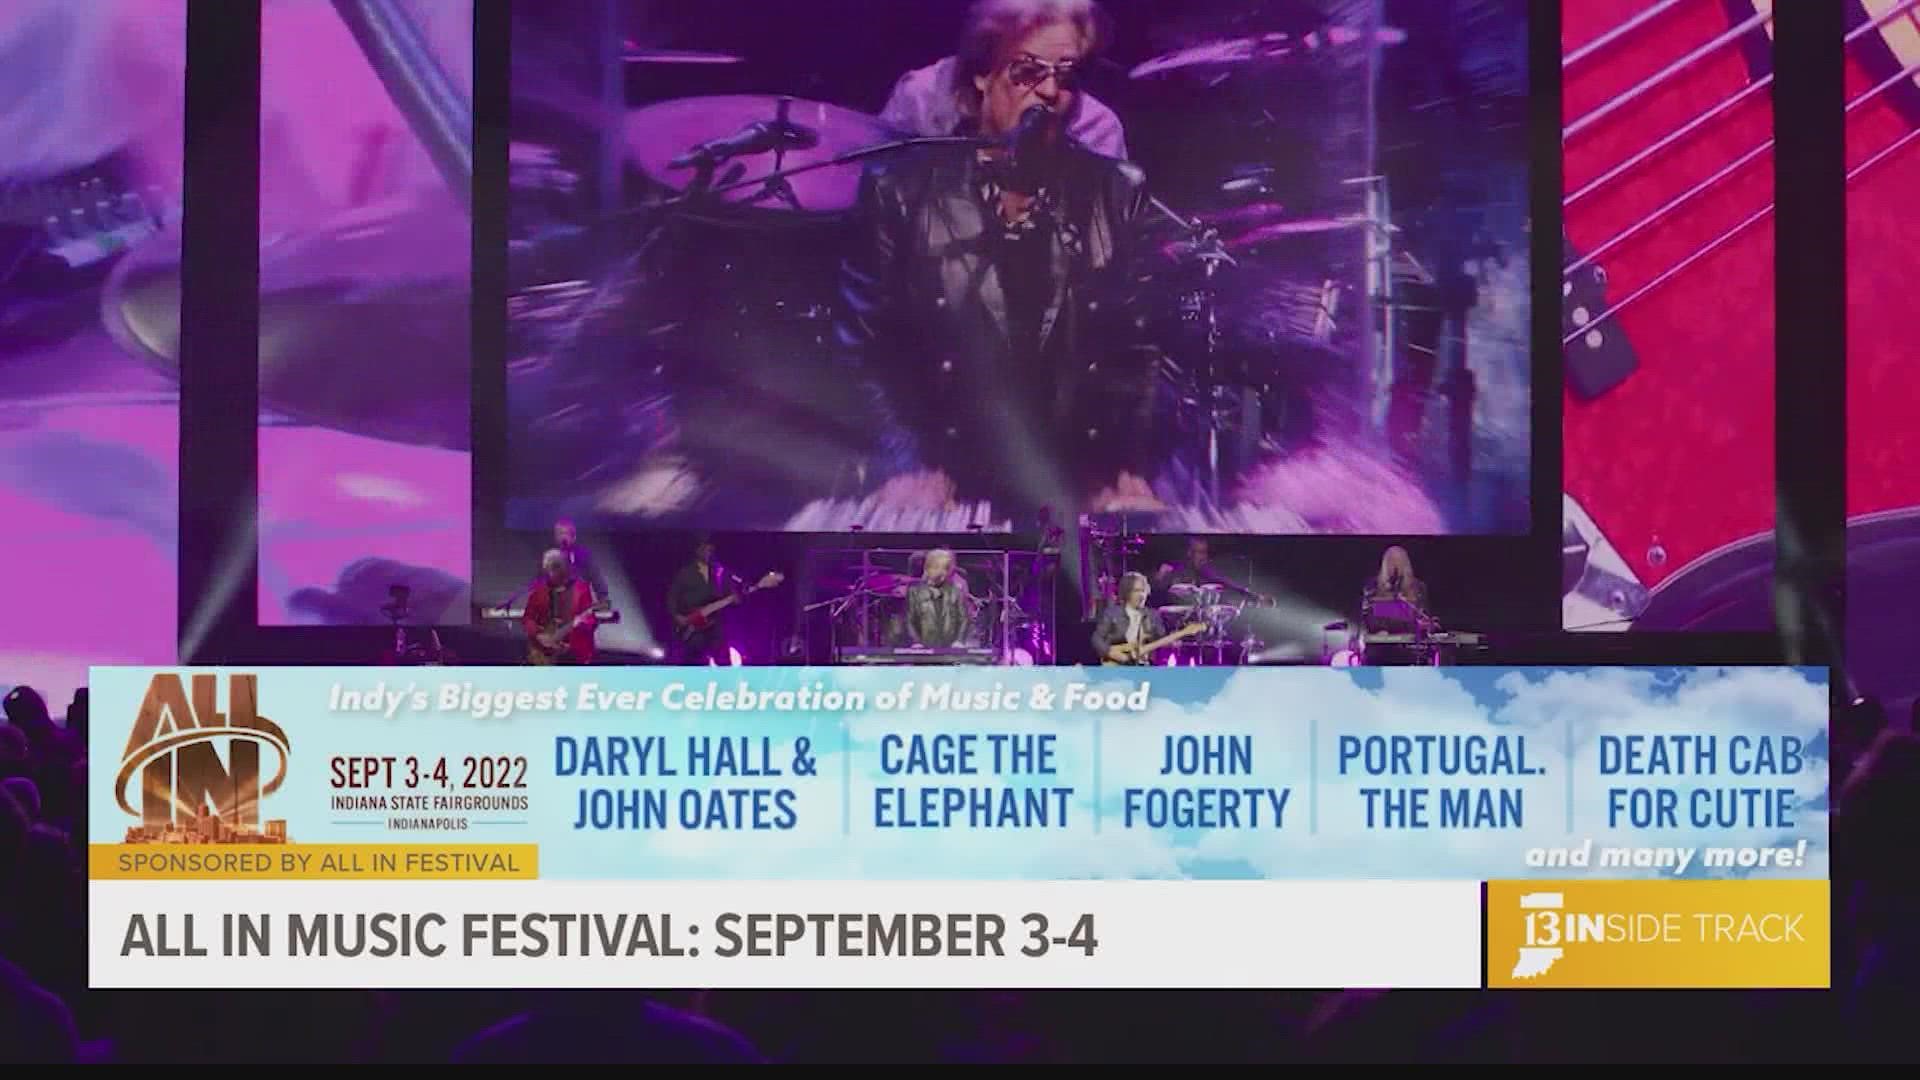 Looking for Labor Day weekend plans? Attend the ALL IN Music Festival coming to Indianapolis September 3 & 4. Music lineup includes Daryl Hall & John Oates.